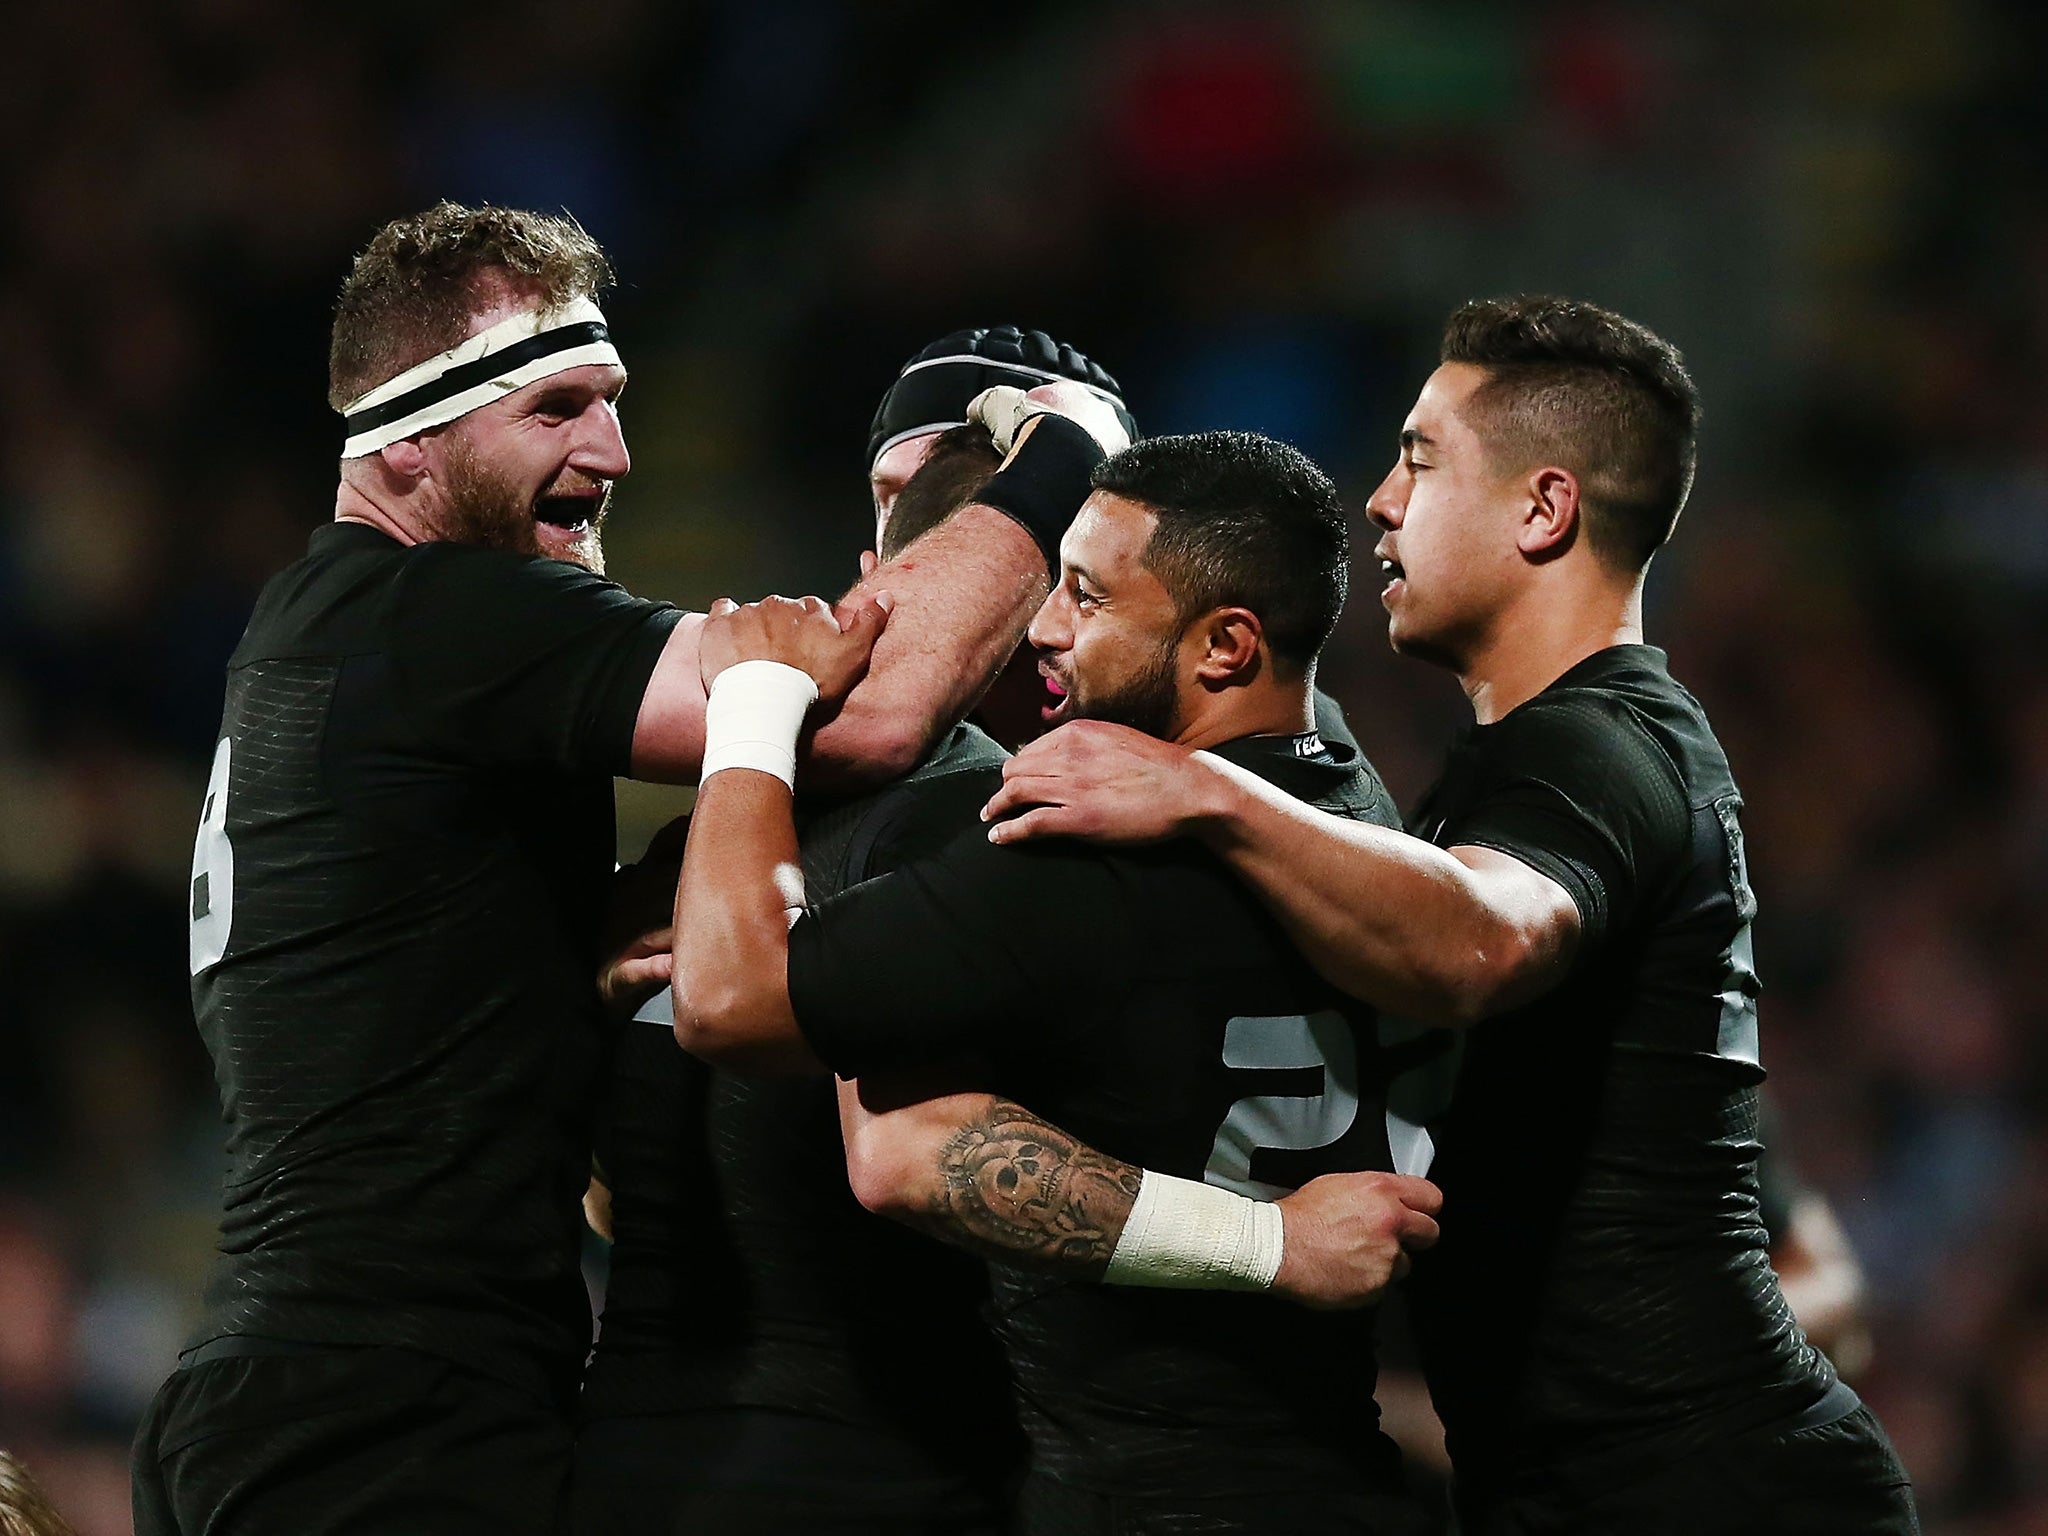 TJ Perenara is mobbed after crossing the line for the All Blacks